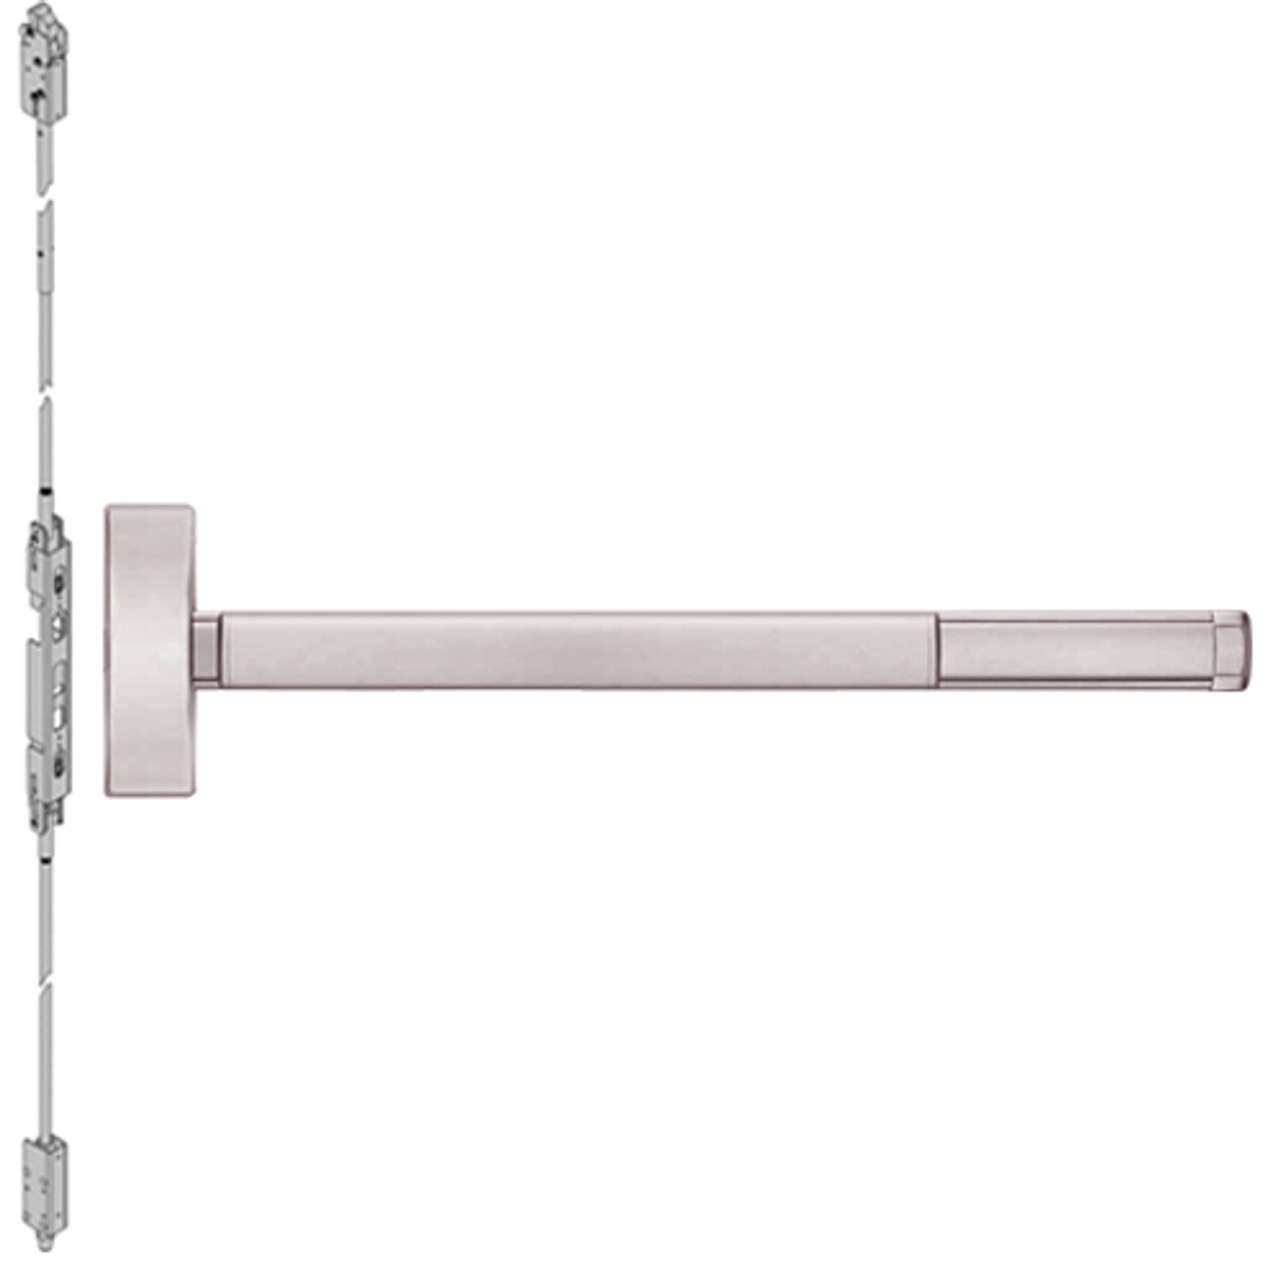 MLRFL2815-628-36 PHI 2800 Series Fire Rated Concealed Vertical Rod Exit Device with Motorized Latch Retraction Prepped for Thumbpiece Always Active in Satin Aluminum Finish